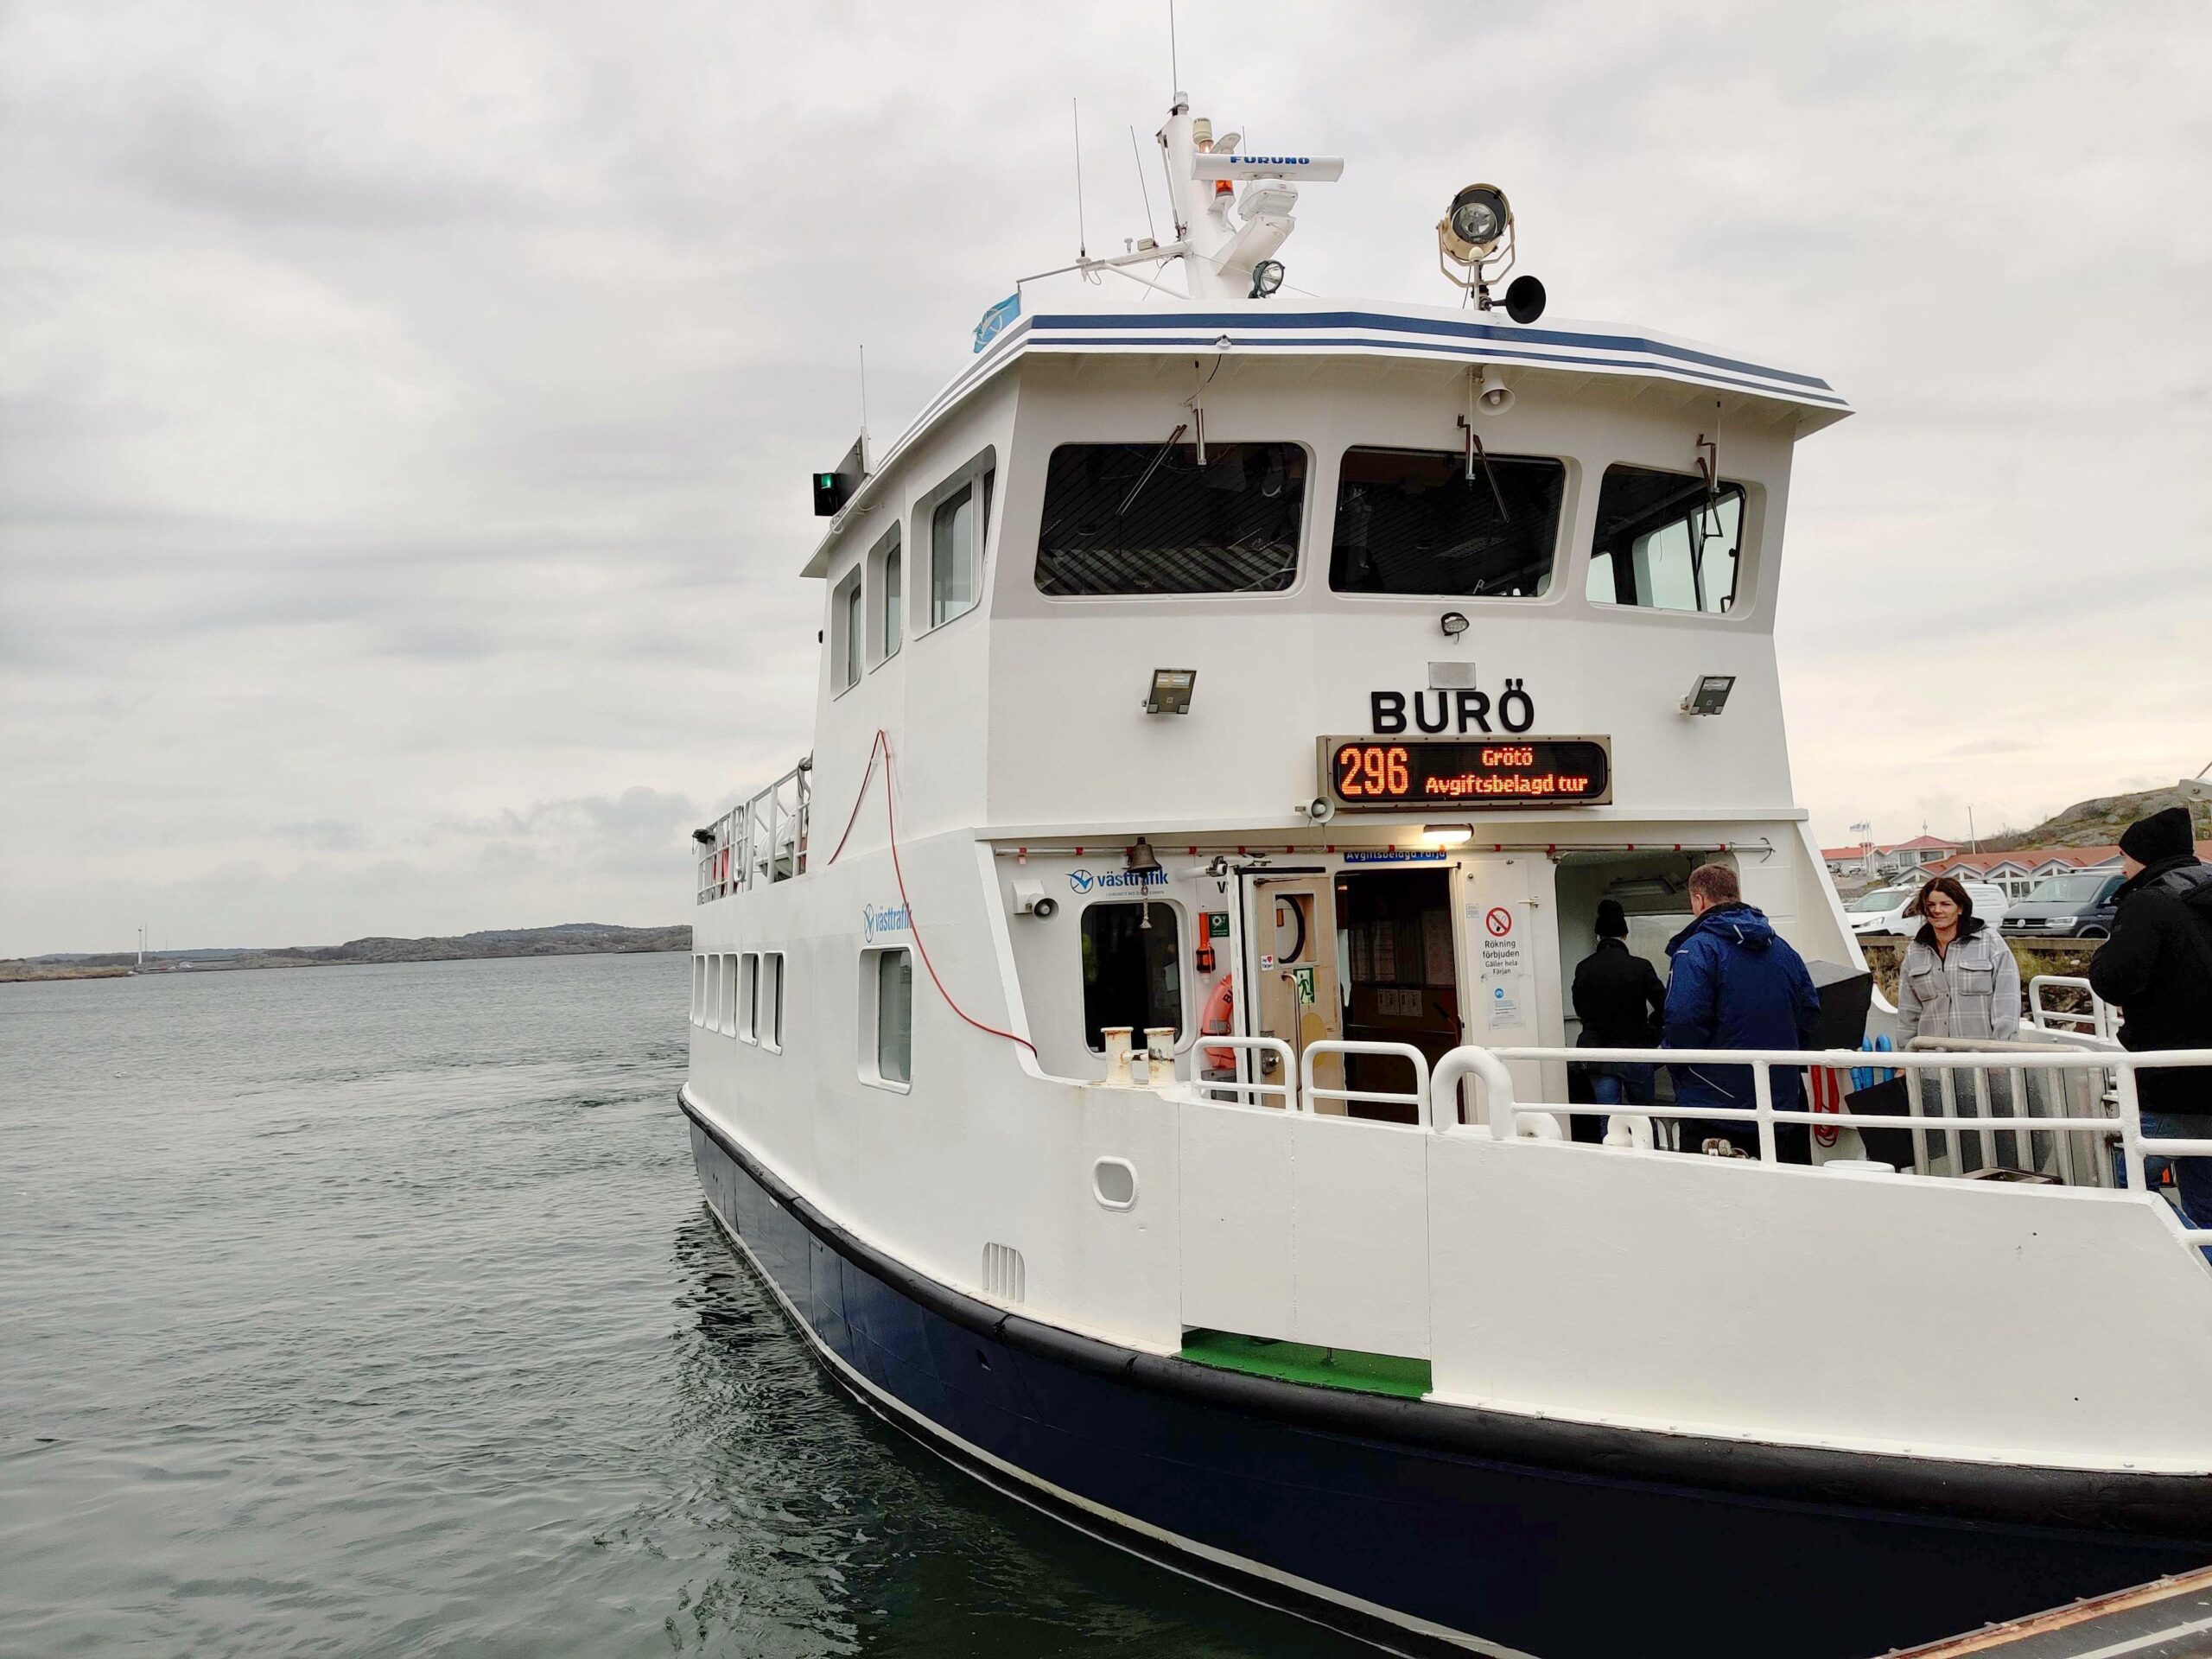 Passenger ferry Buro equipped with iHelm by Cetasol